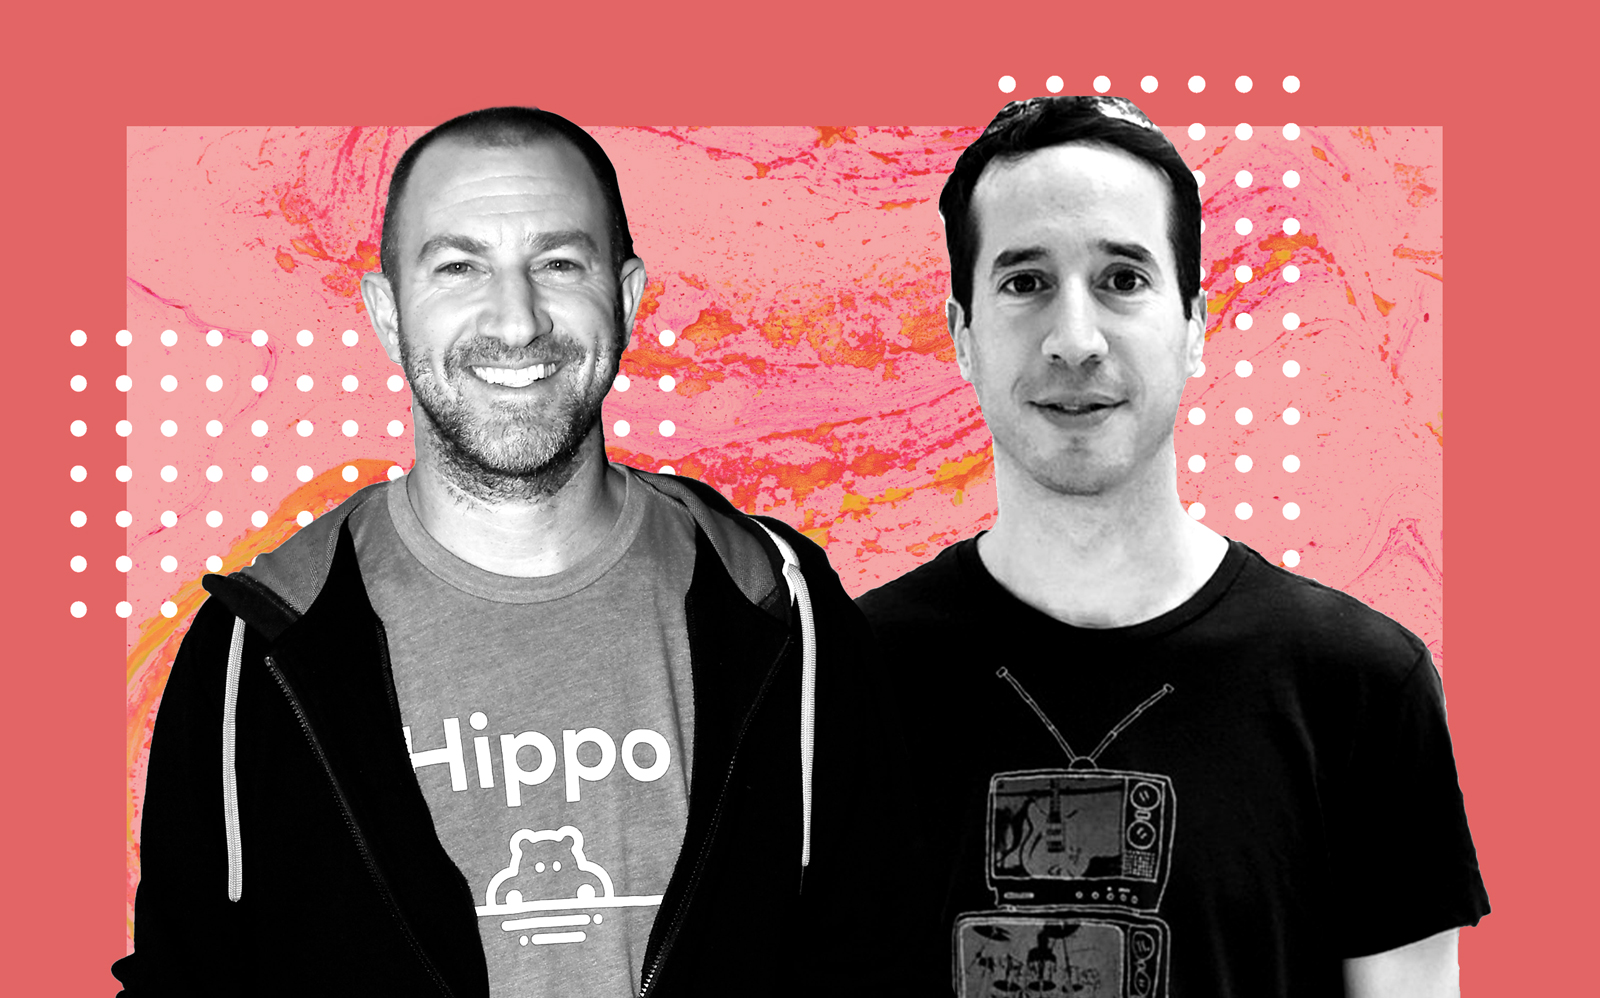 Hippo founders Assaf Wand and Eyal Navon (LinkedIn)